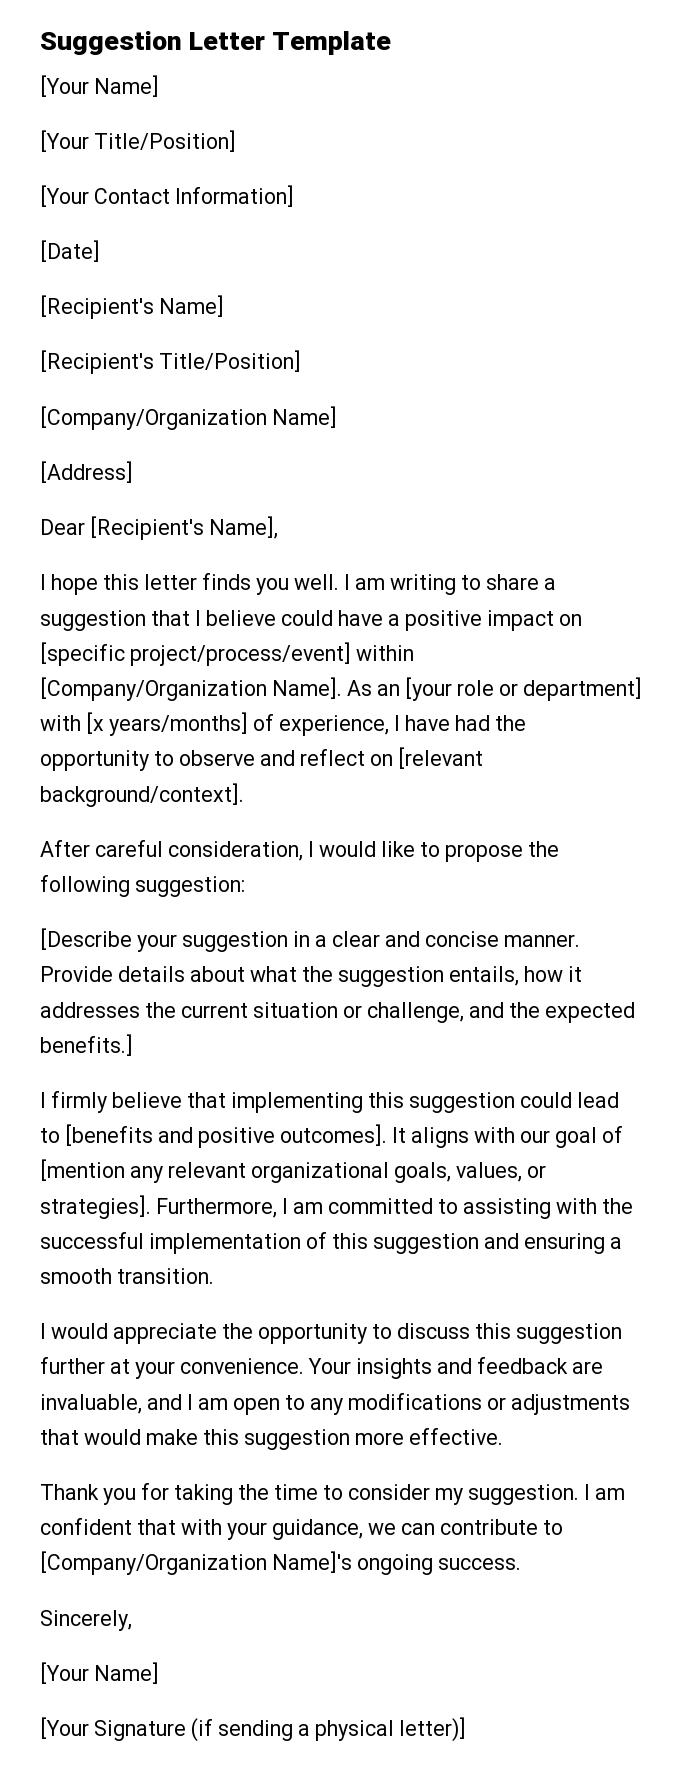 Suggestion Letter Template